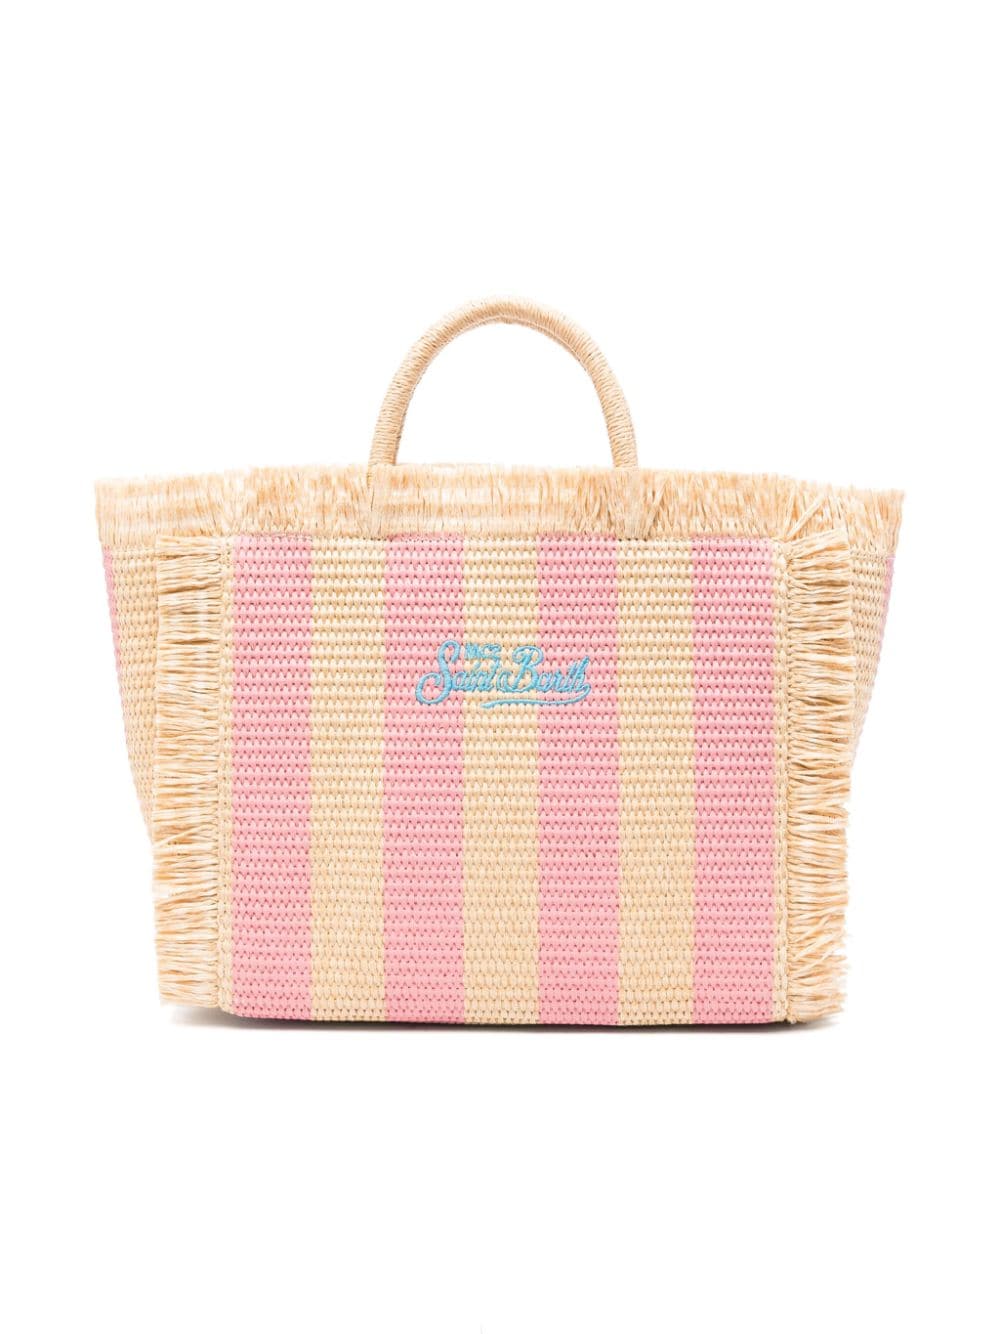 Beige and pink bag for girls with light blue logo